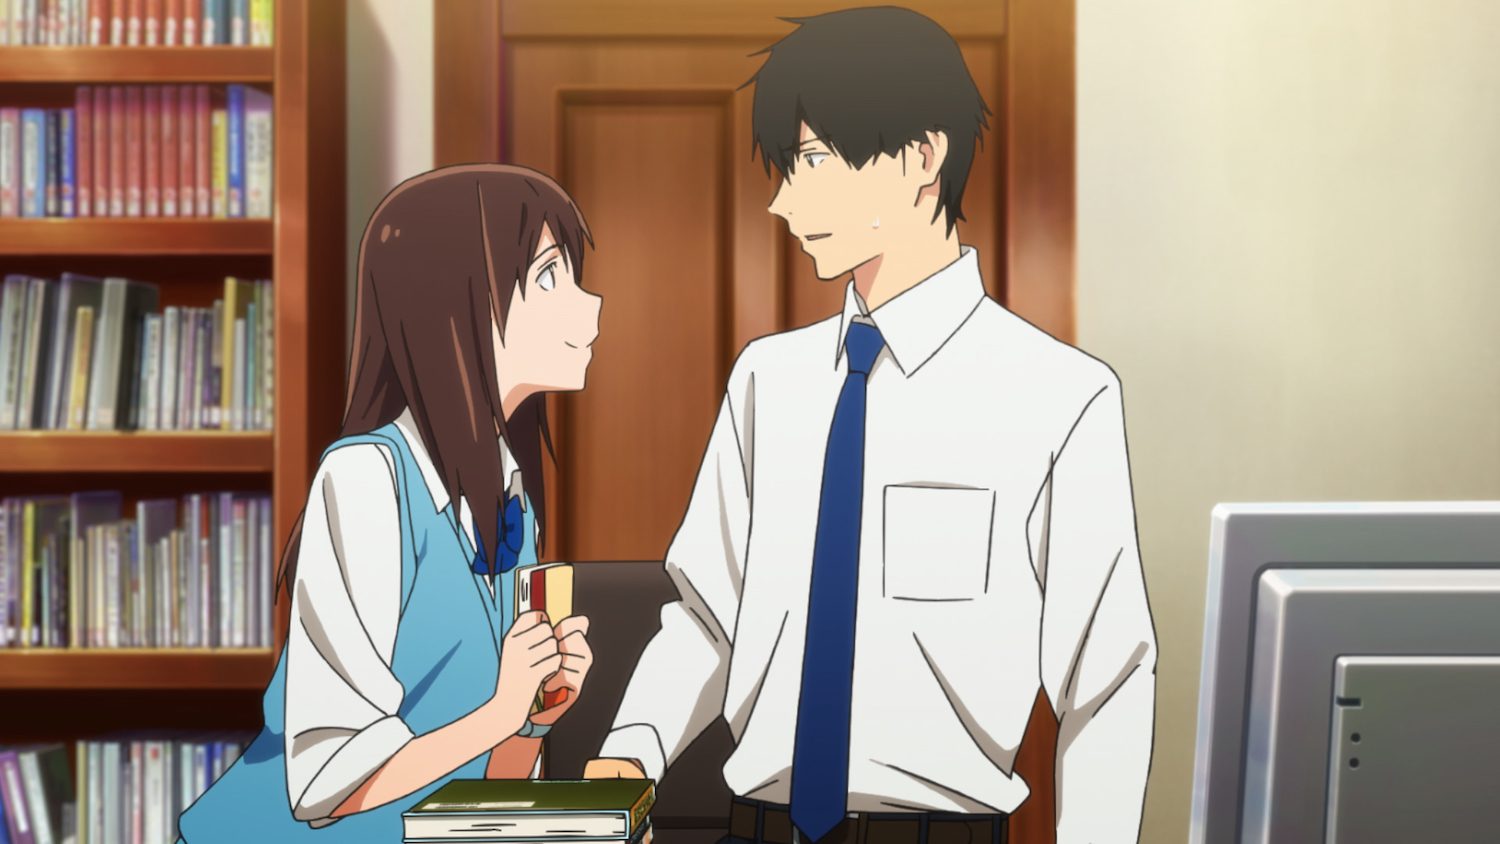 movie review of i want to eat your pancreas